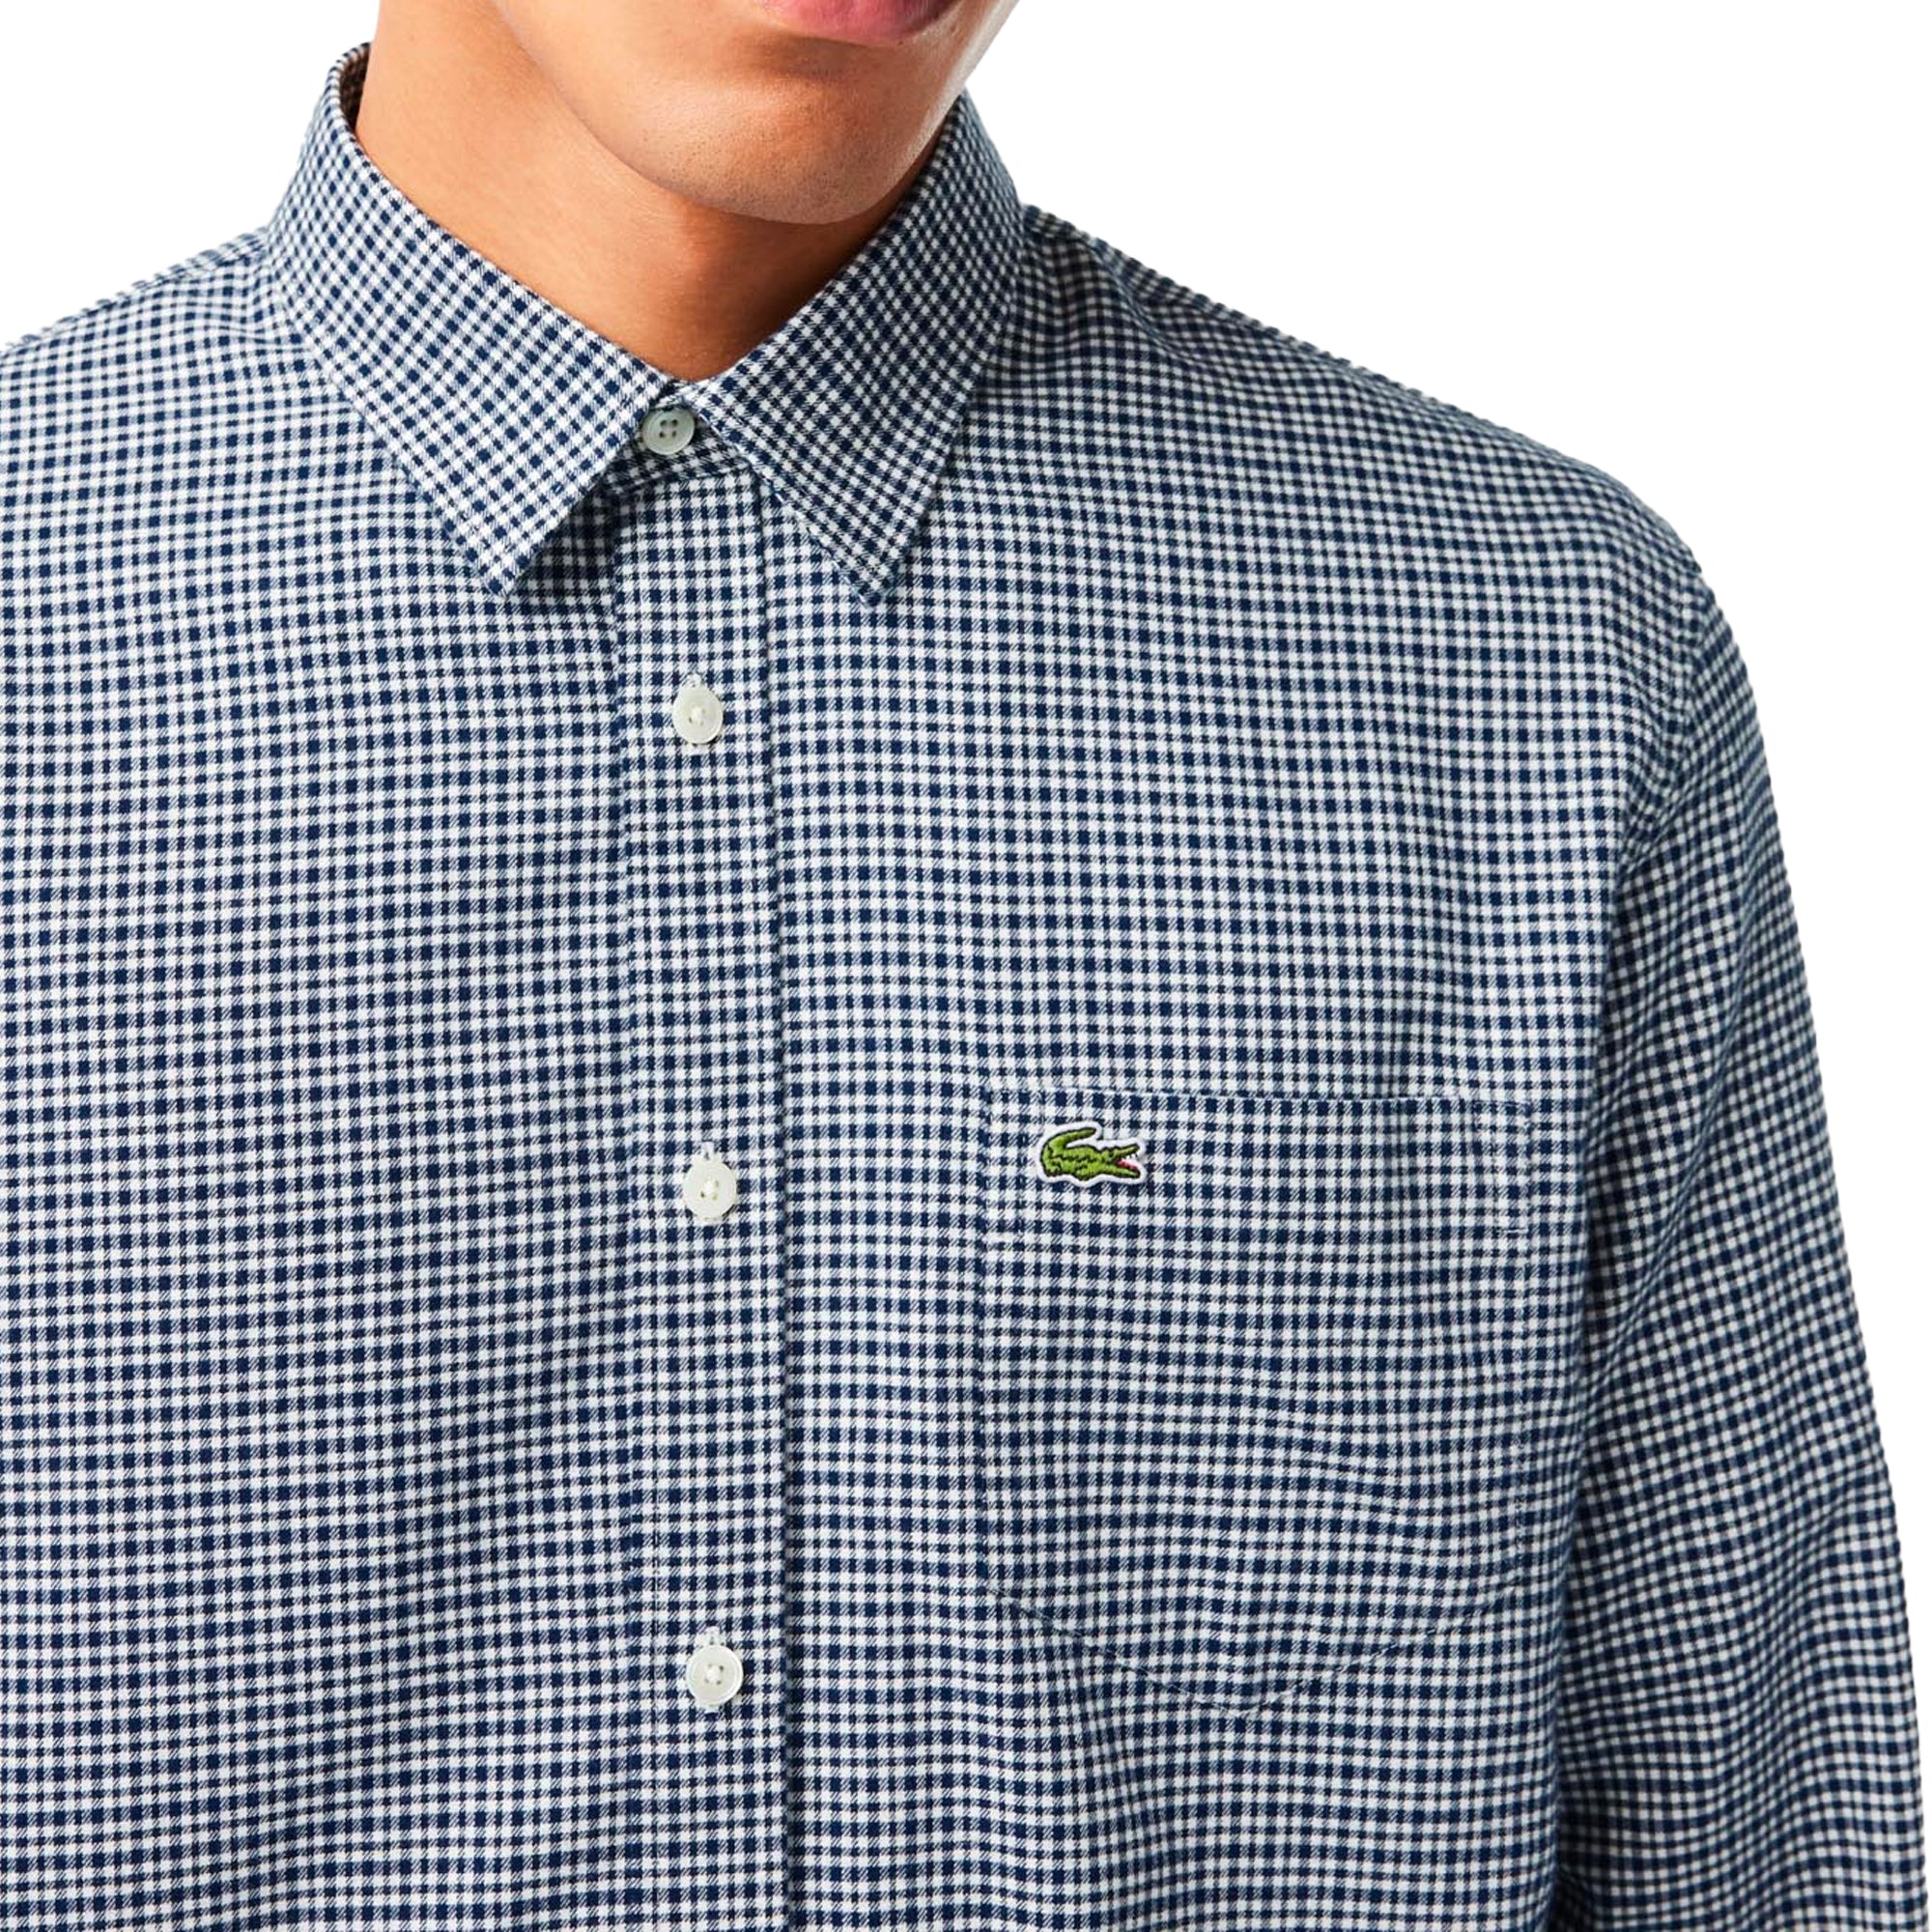 Lacoste Brushed Cotton Gingham Check Shirt CH1885 - Navy / White